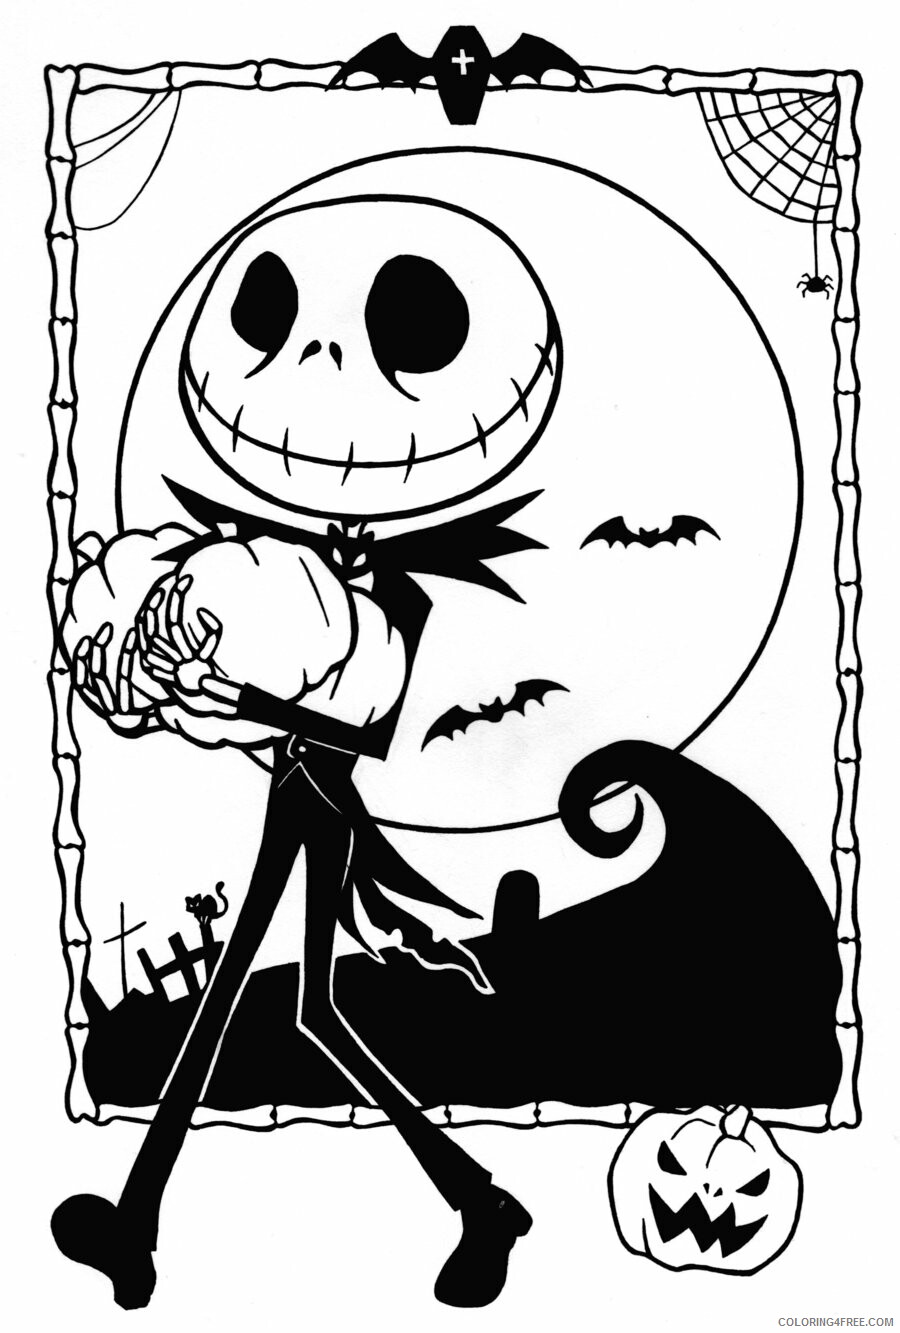 Nightmare Before Christmas Coloring Pages TV Film Printable 2020 05445 Coloring4free